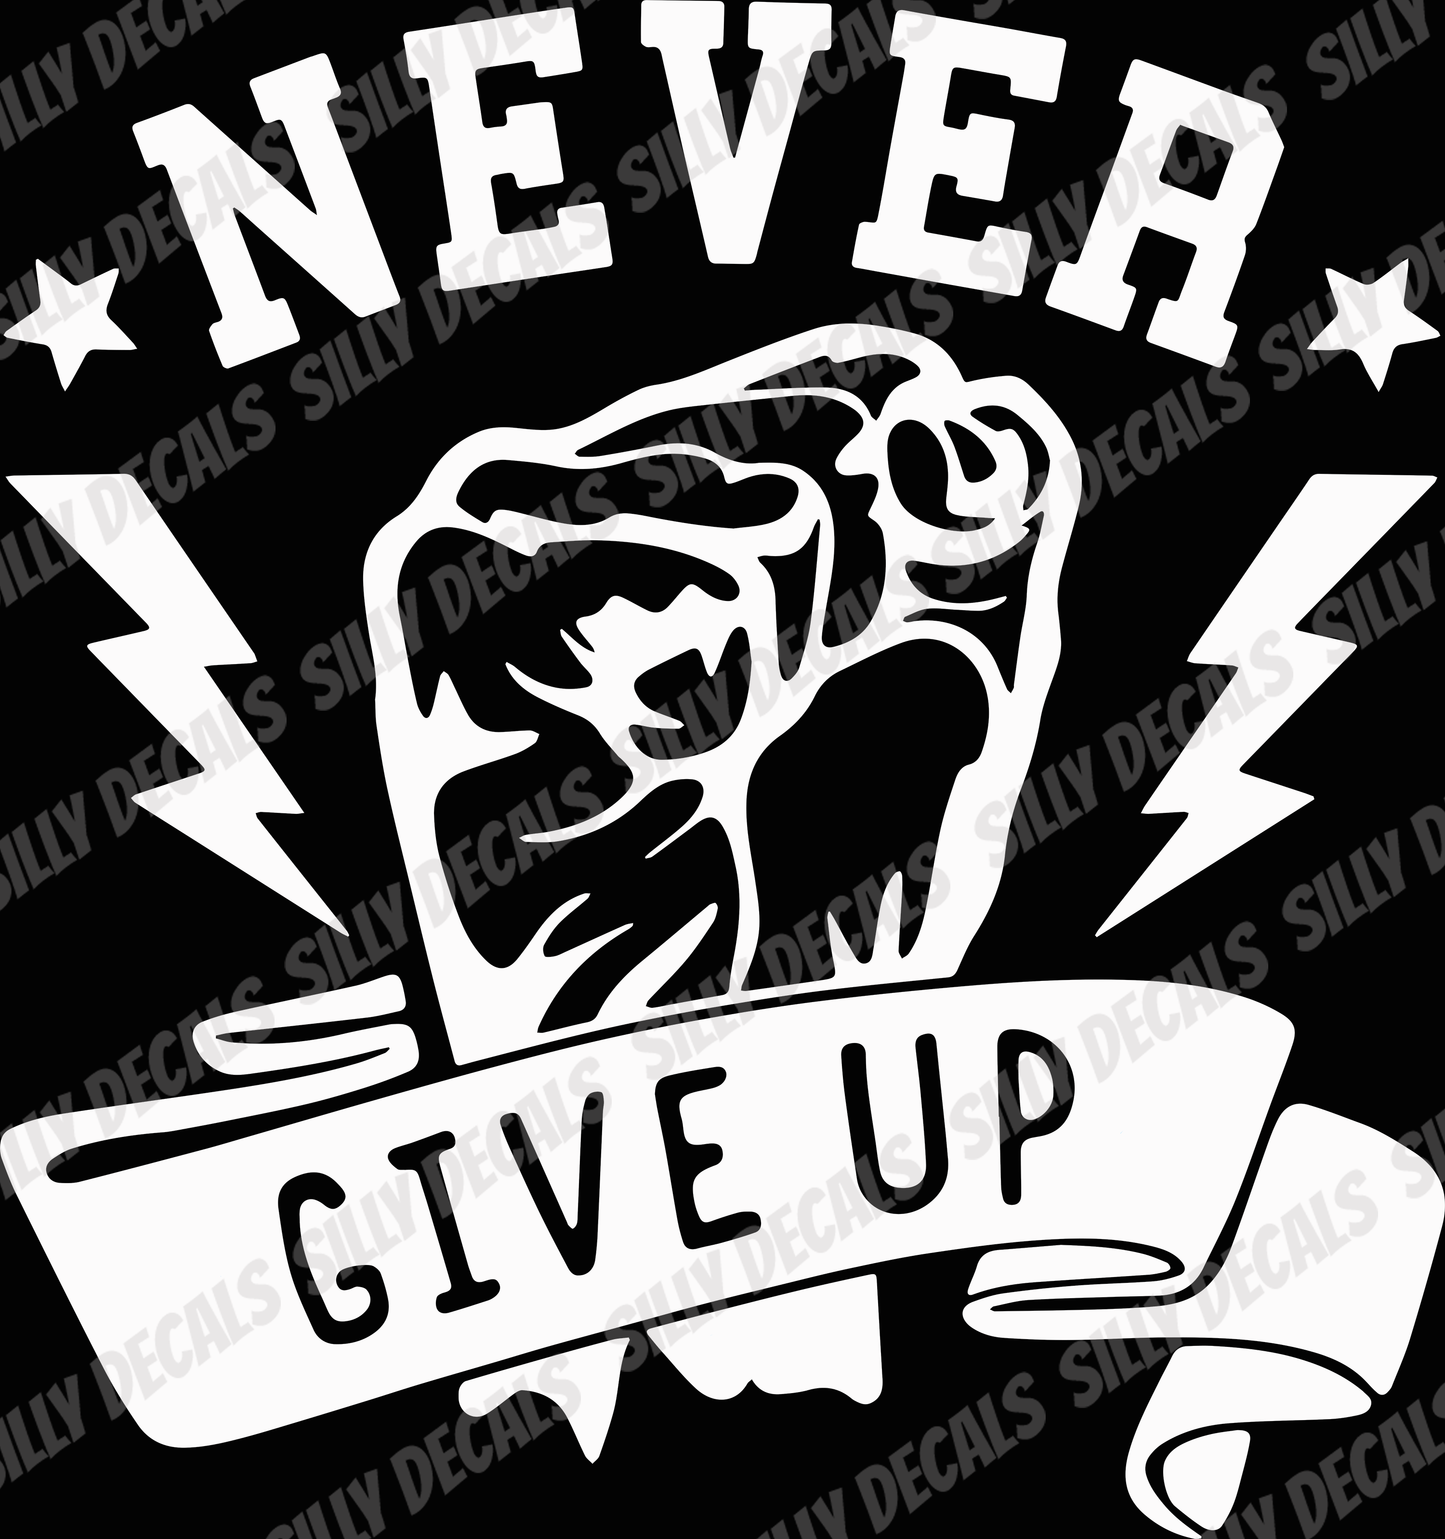 Never Give Up; Motivational Vinyl Decals Suitable For Cars, Windows, Walls, and More!